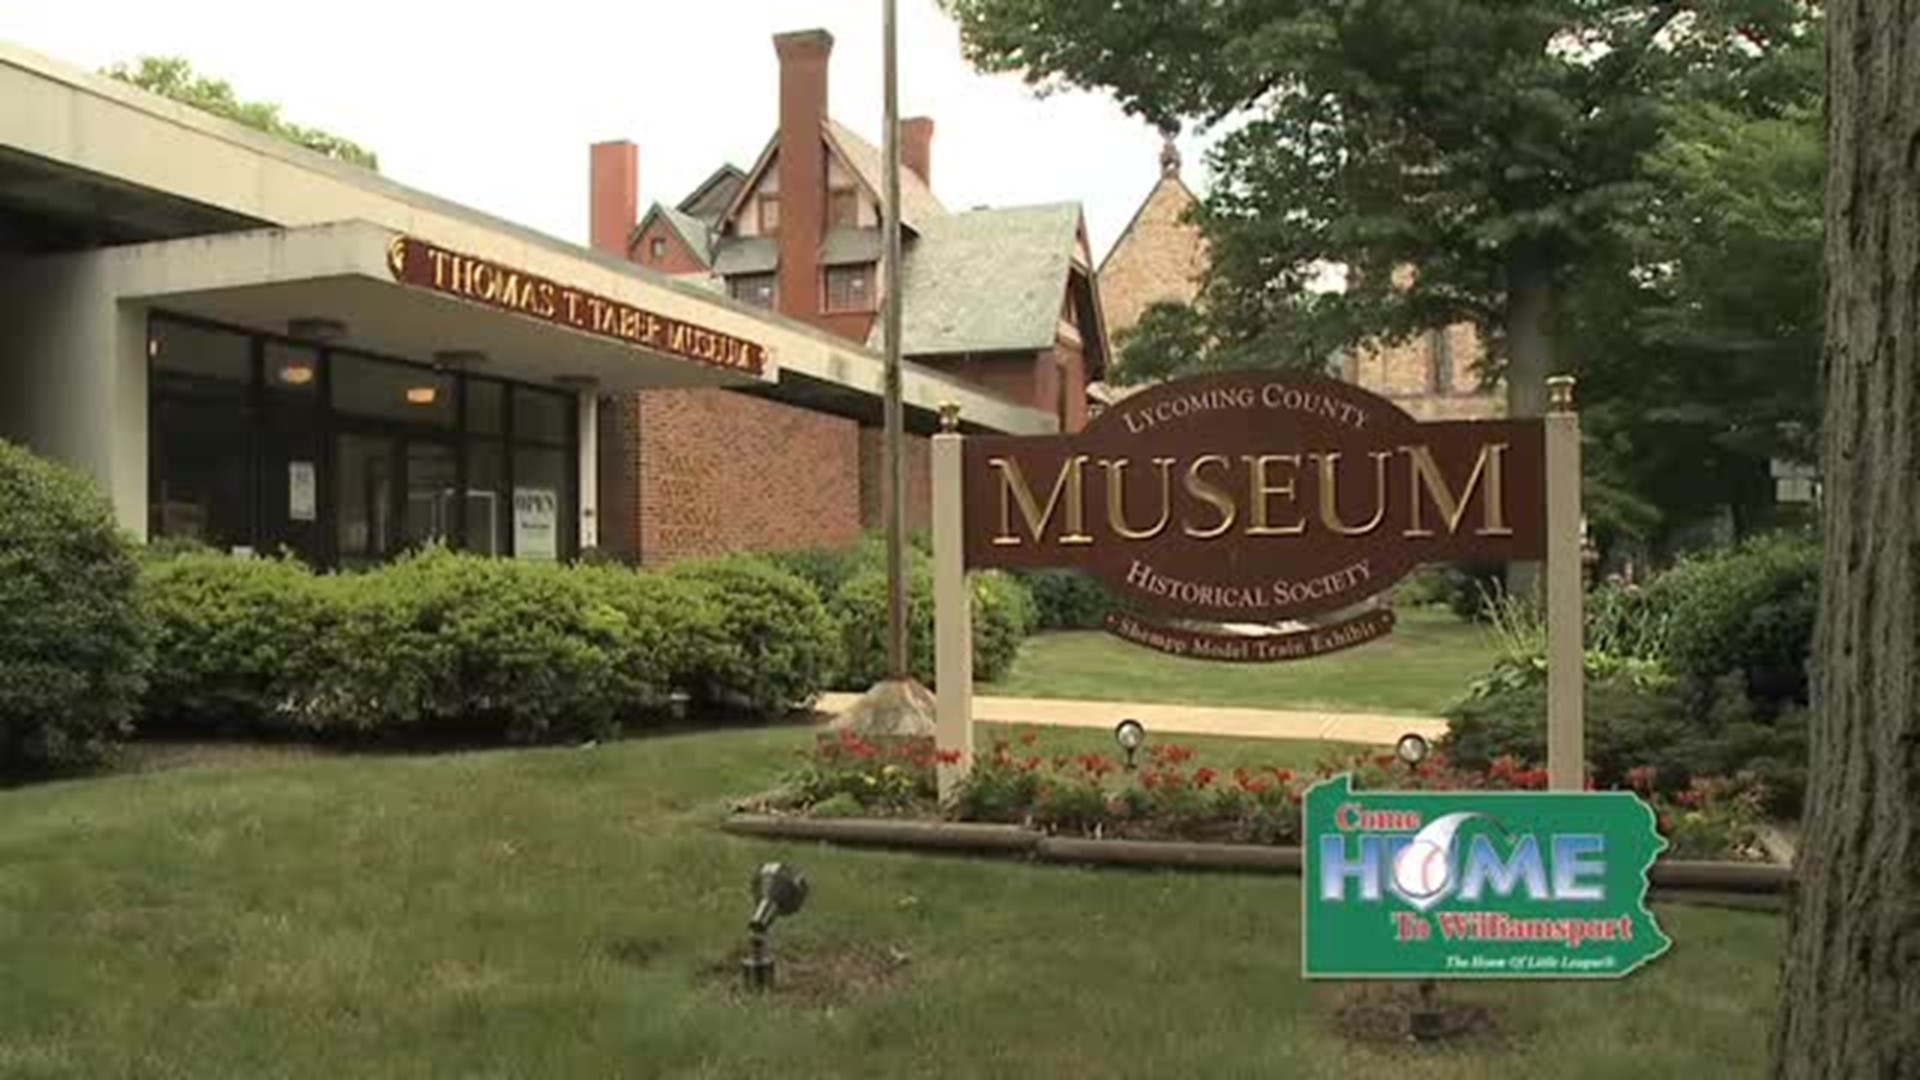 Favorite Destinations - Lycoming County - Museums